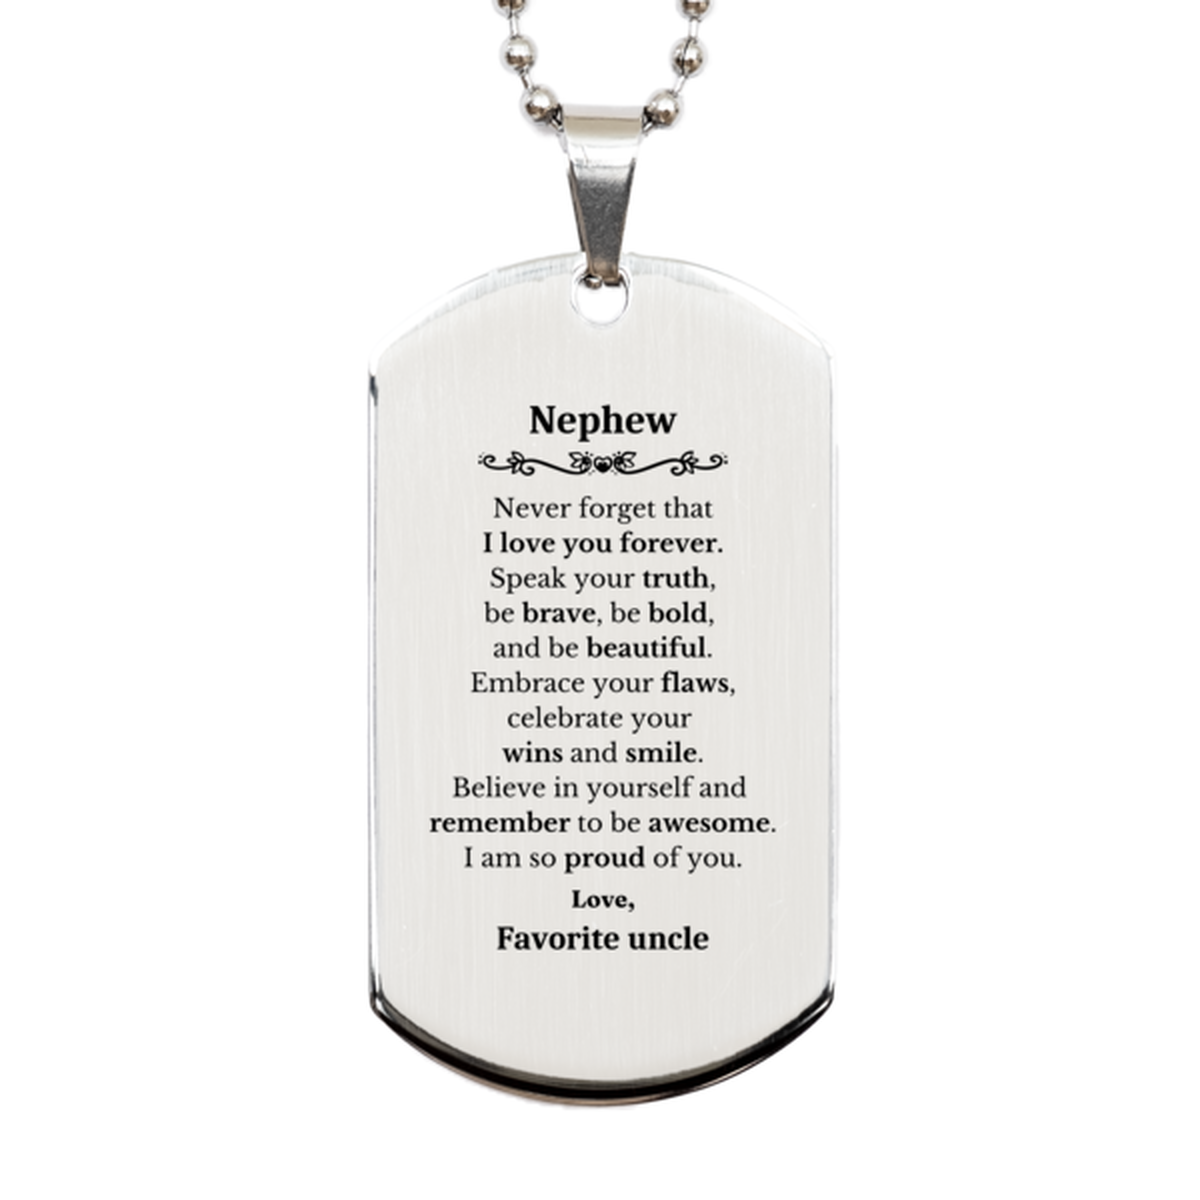 Nephew Silver Dog Tag, Never forget that I love you forever, Inspirational Nephew Birthday Unique Gifts From Favorite uncle